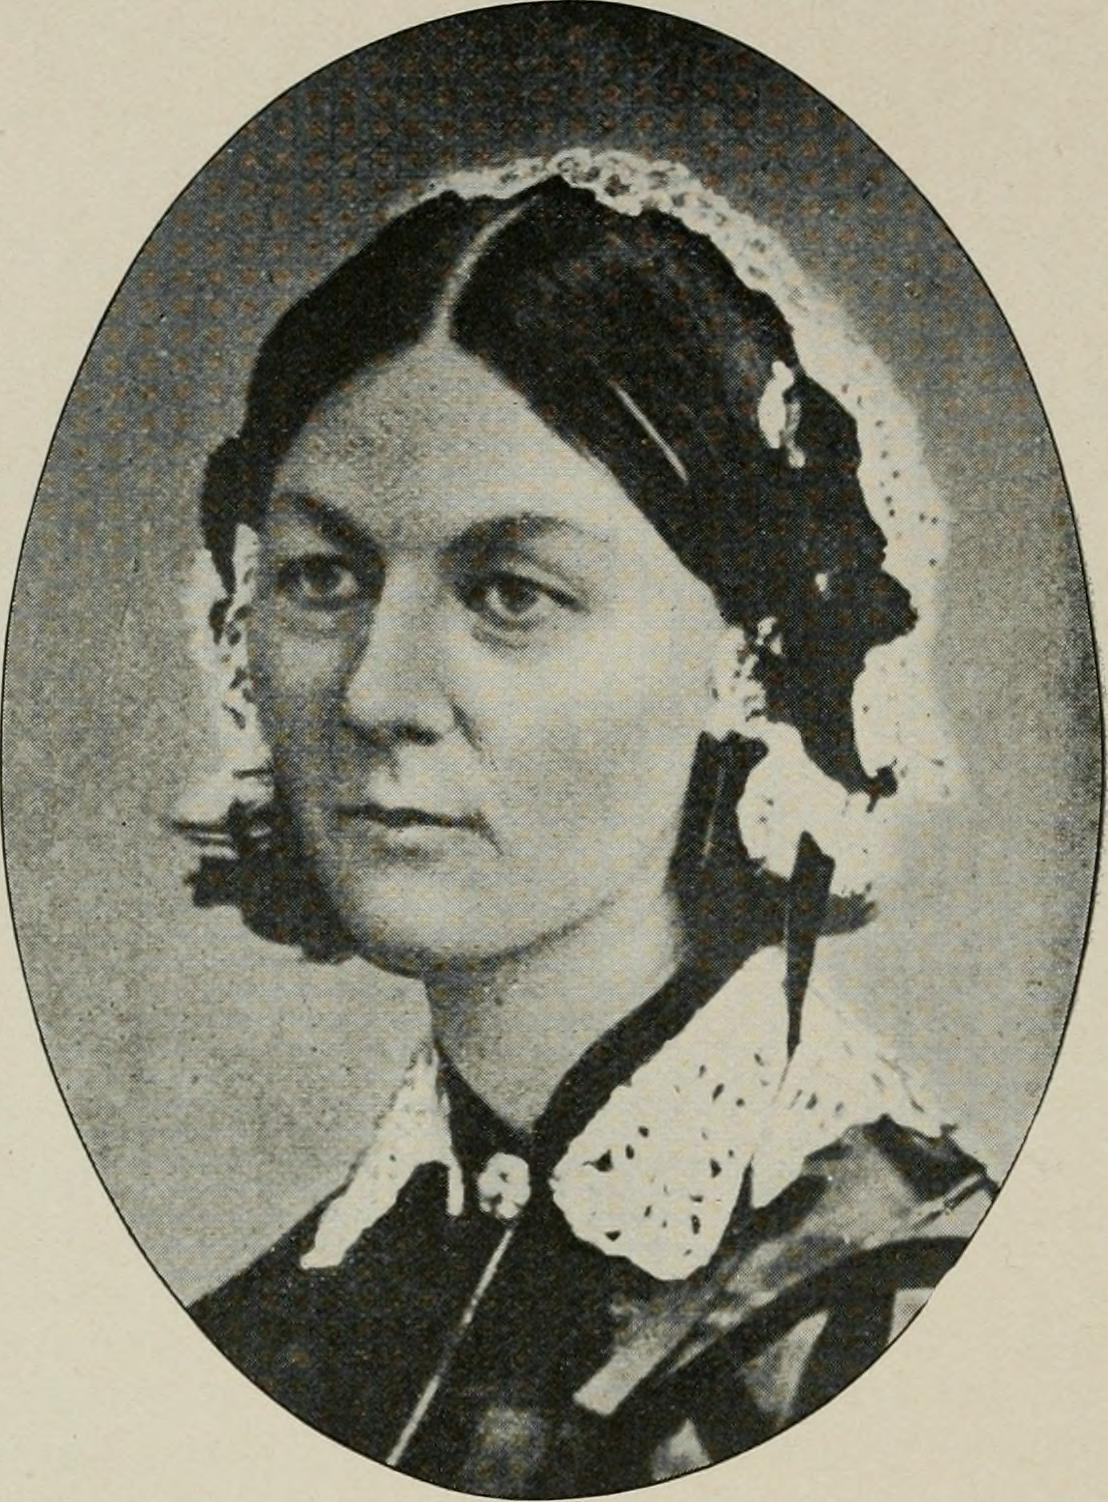 Named after the Italian city where she was born, Florence Nightingale’s name was regularly given to girls for over half a century